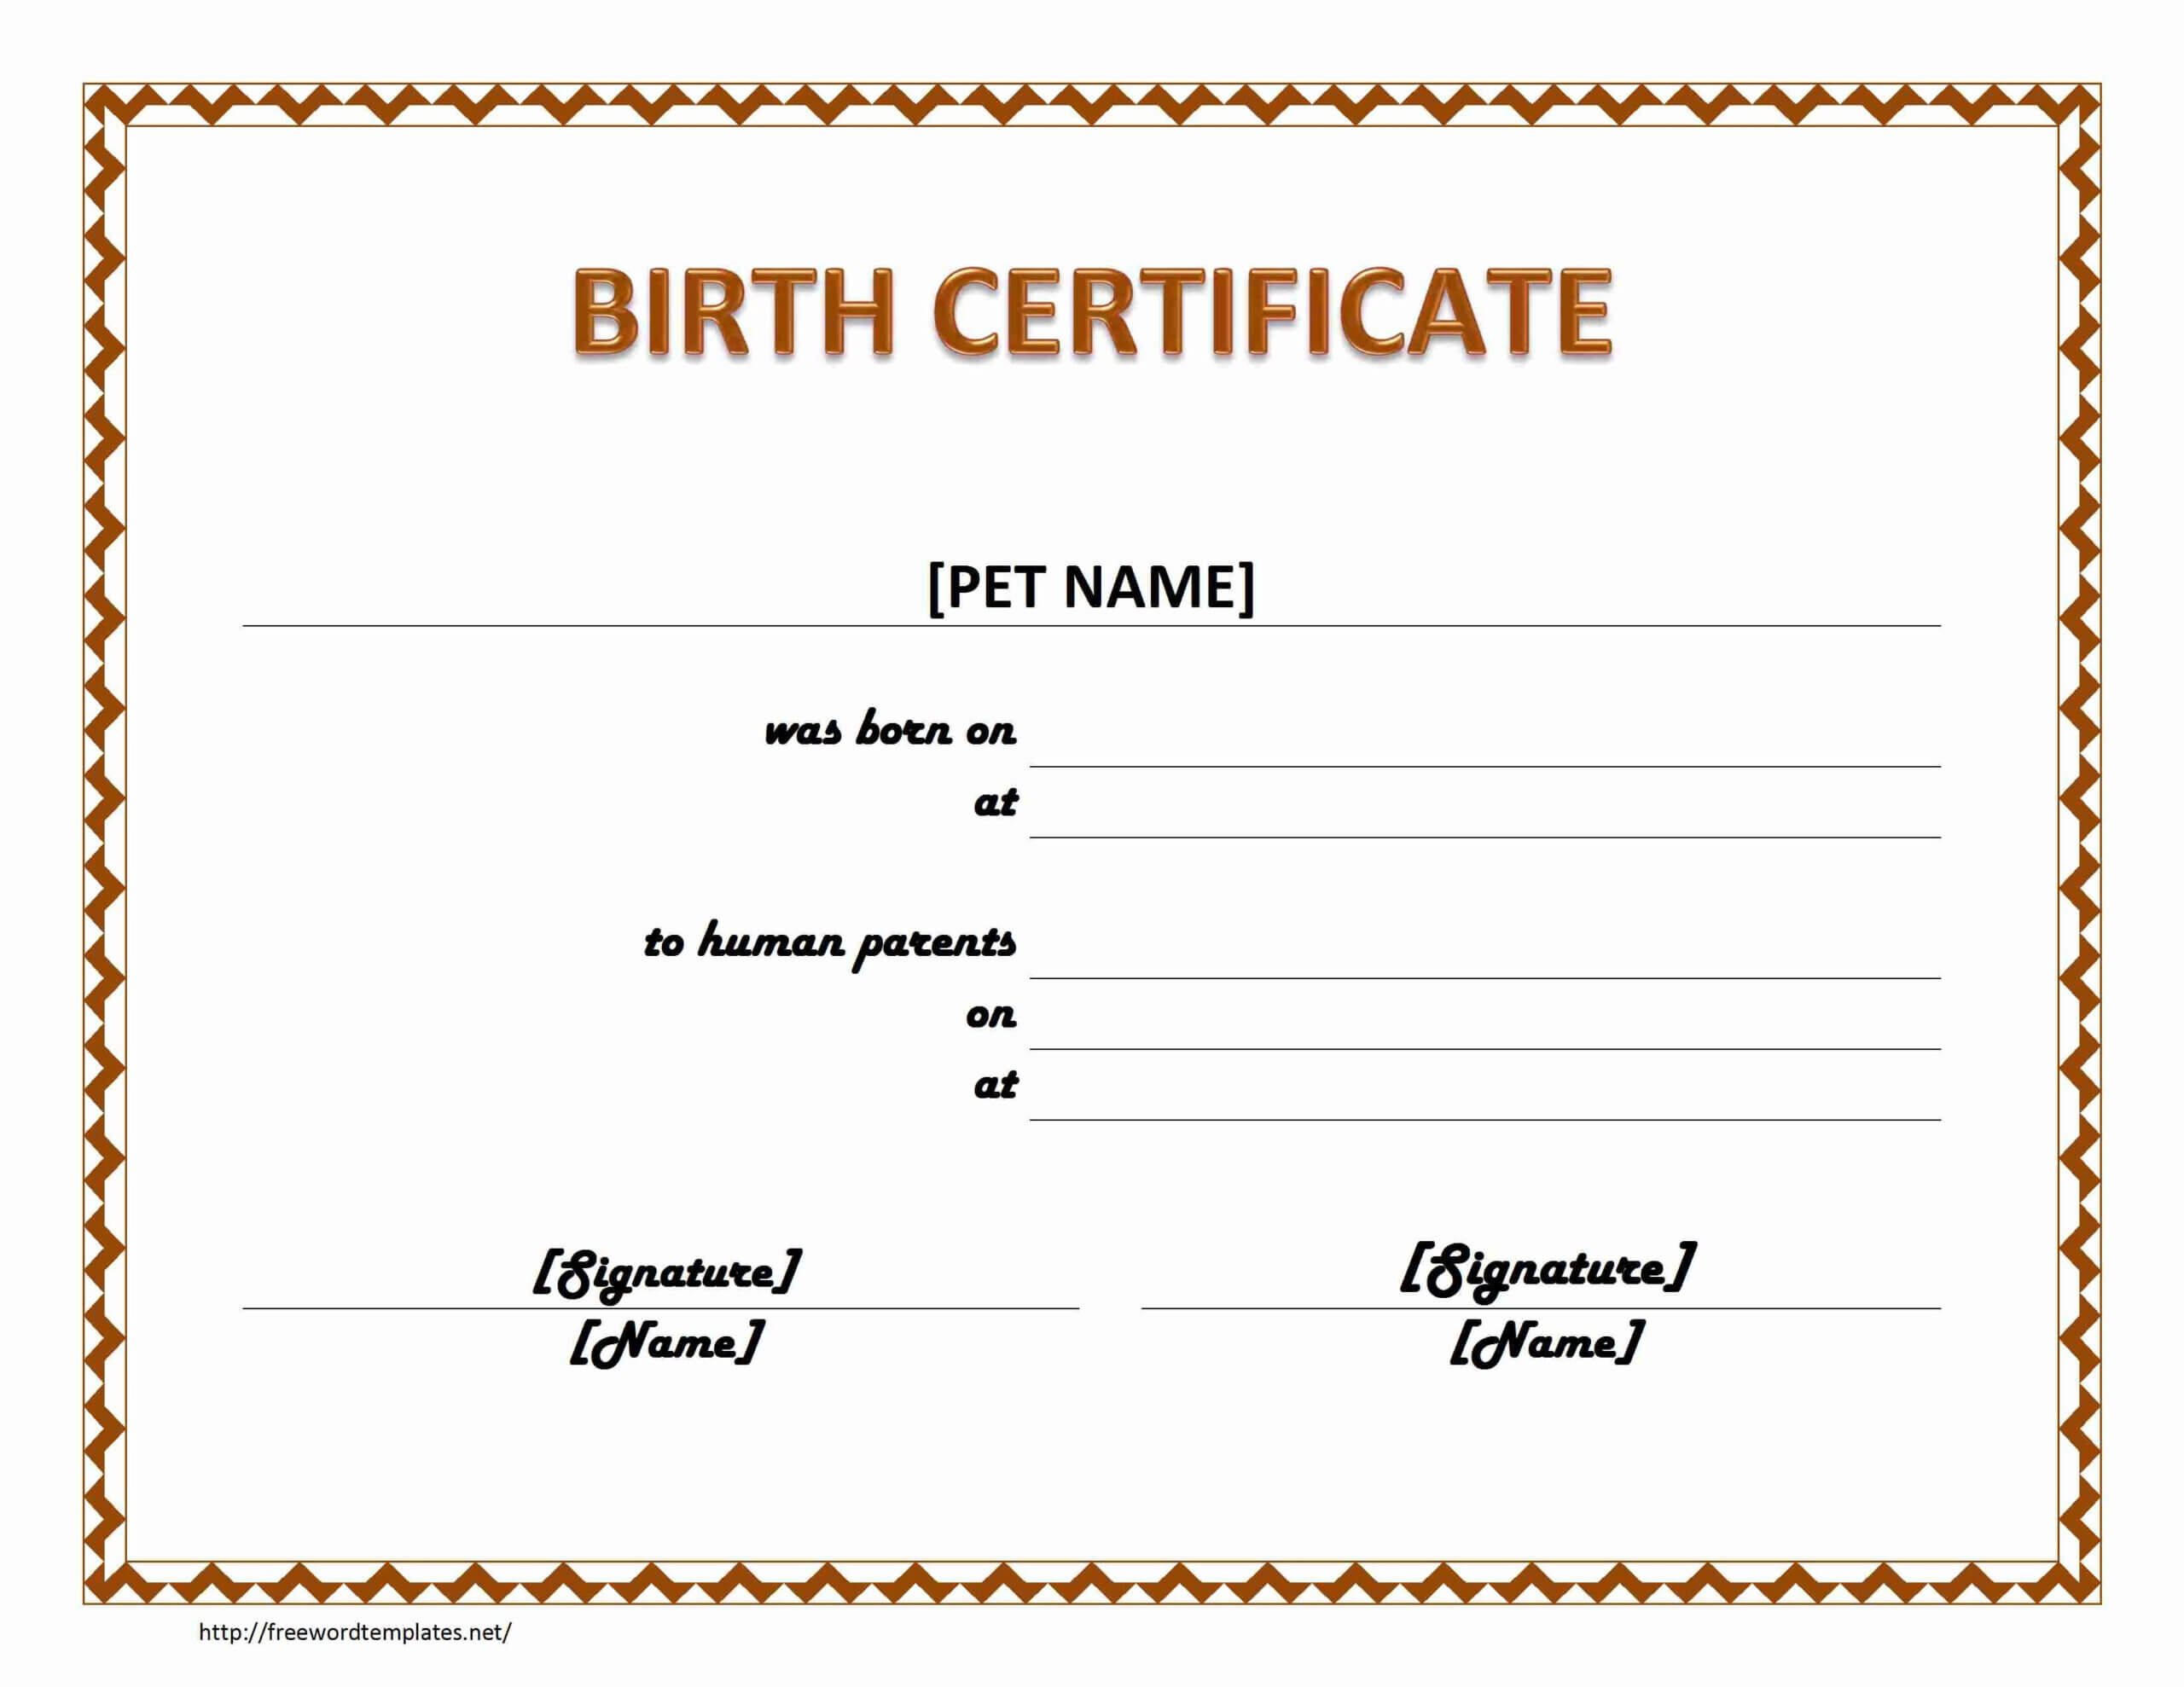 Pet Birth Certificate Maker | Pet Birth Certificate For Word Pertaining To Editable Birth Certificate Template